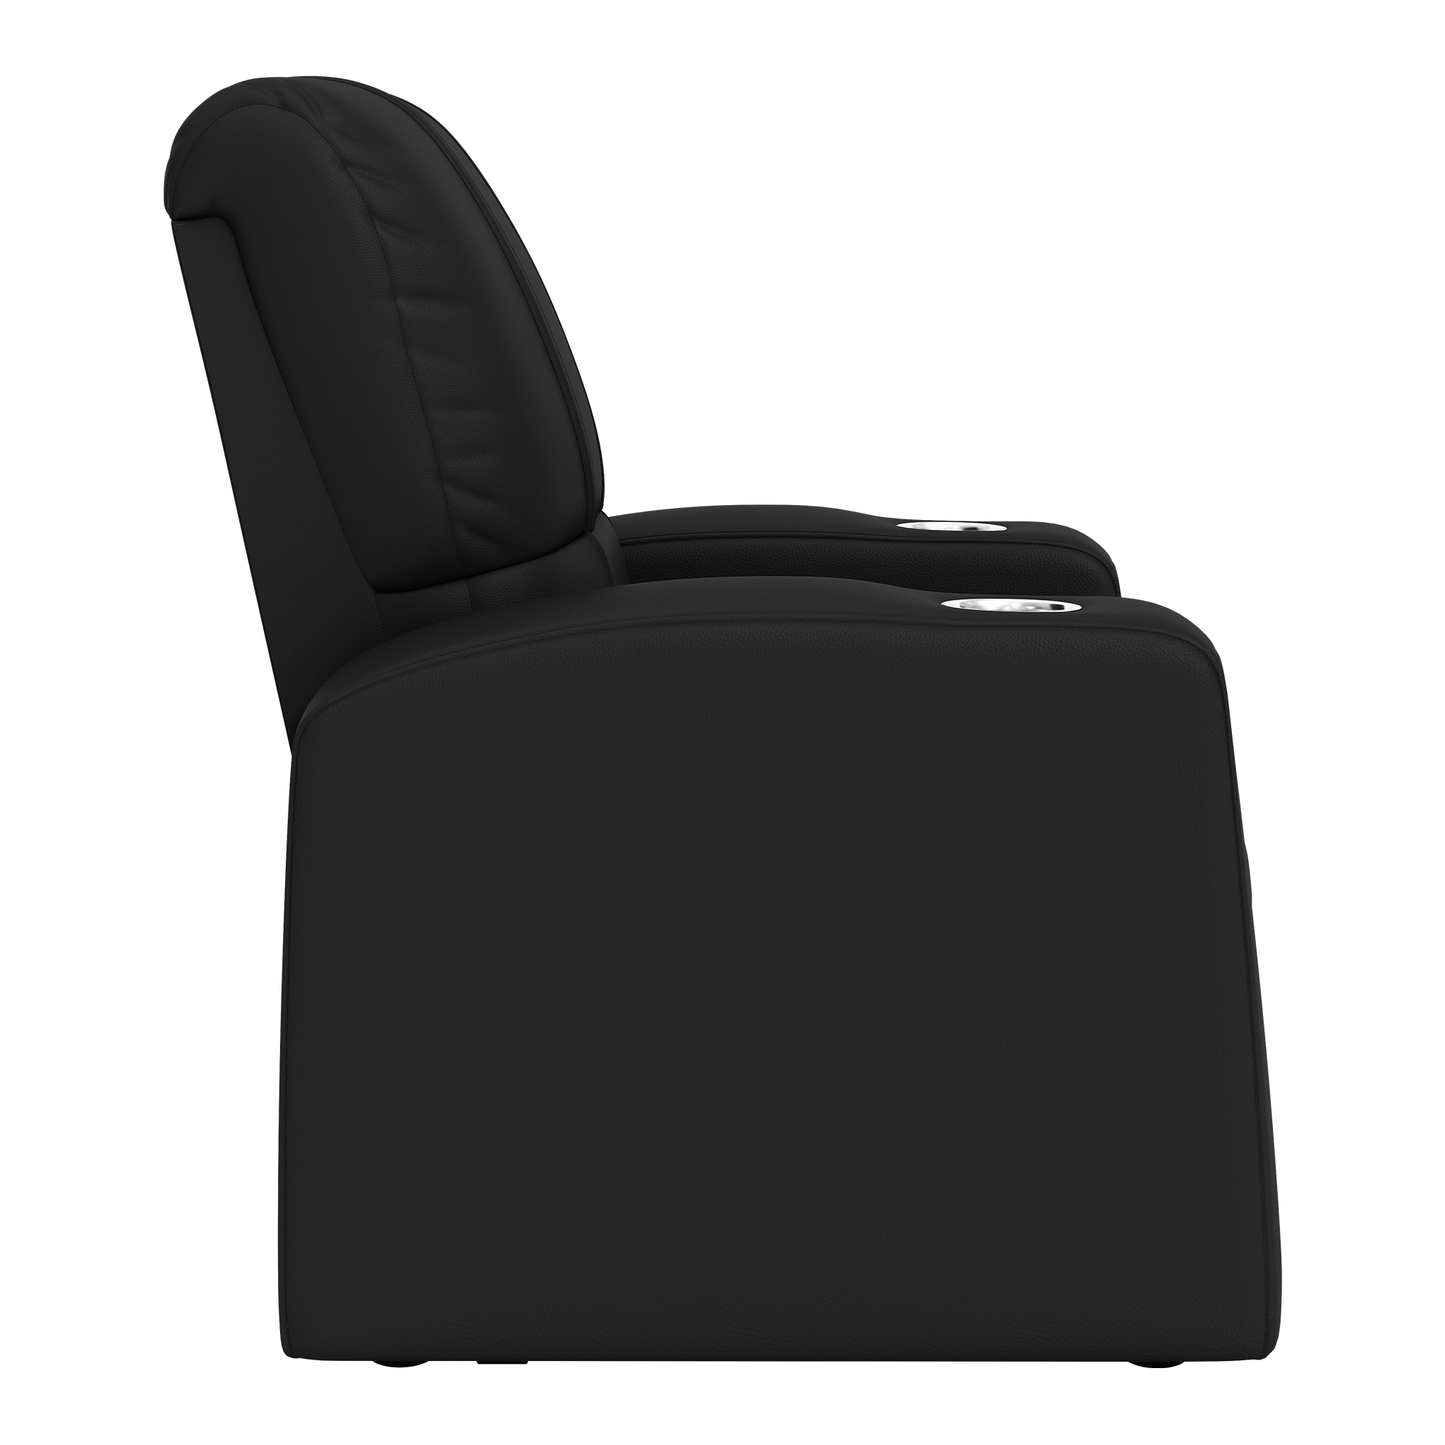 Relax Home Theater Recliner with 8oki Wordmark Logo